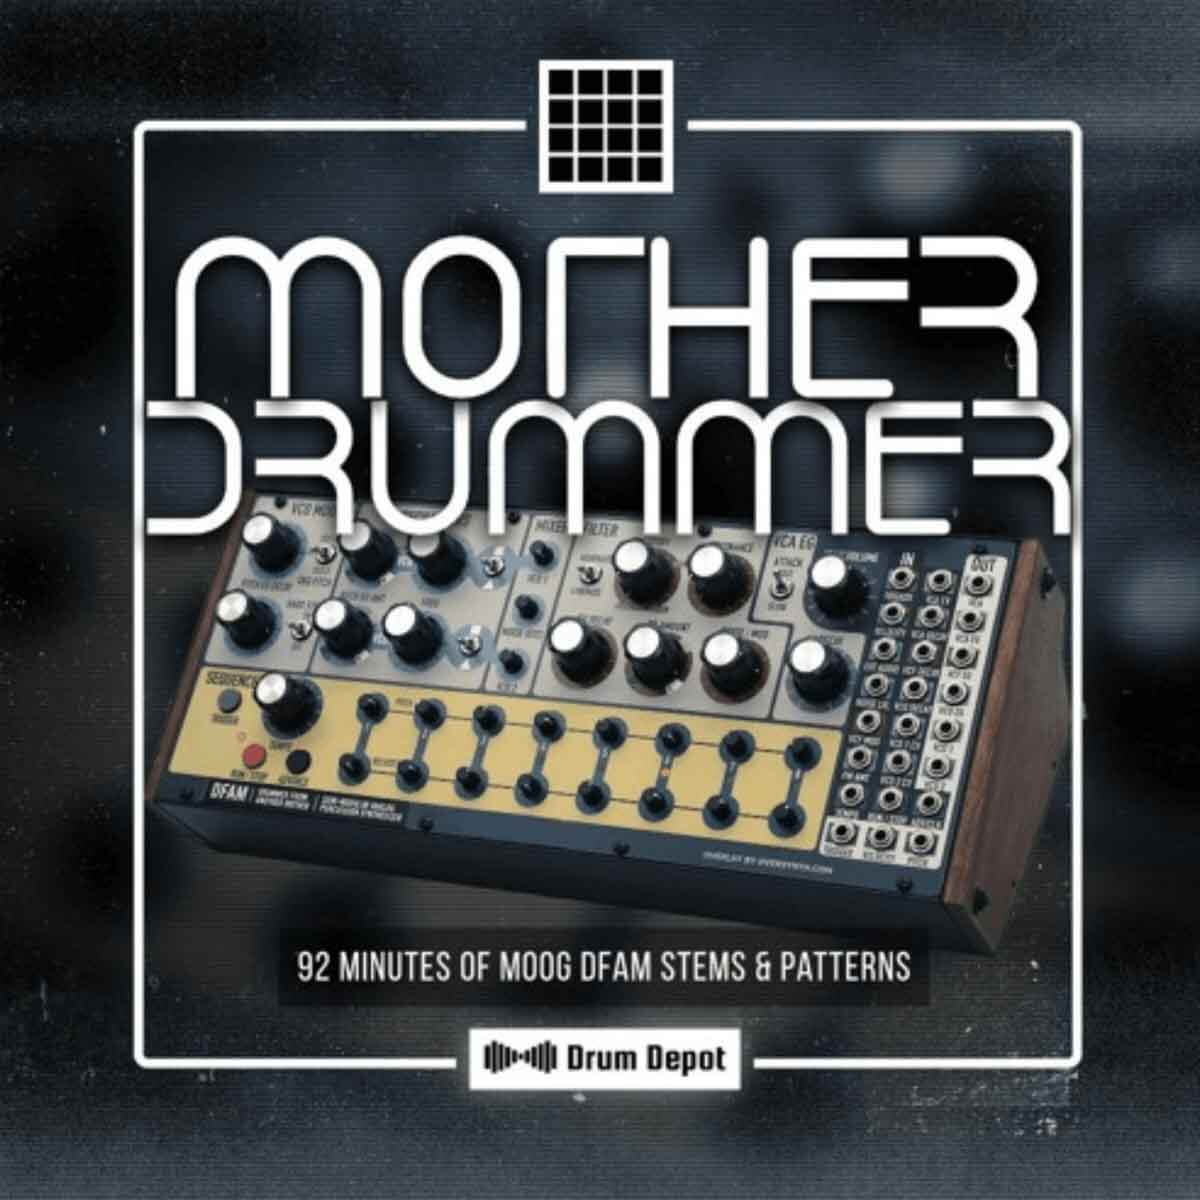 The Motherdrummer